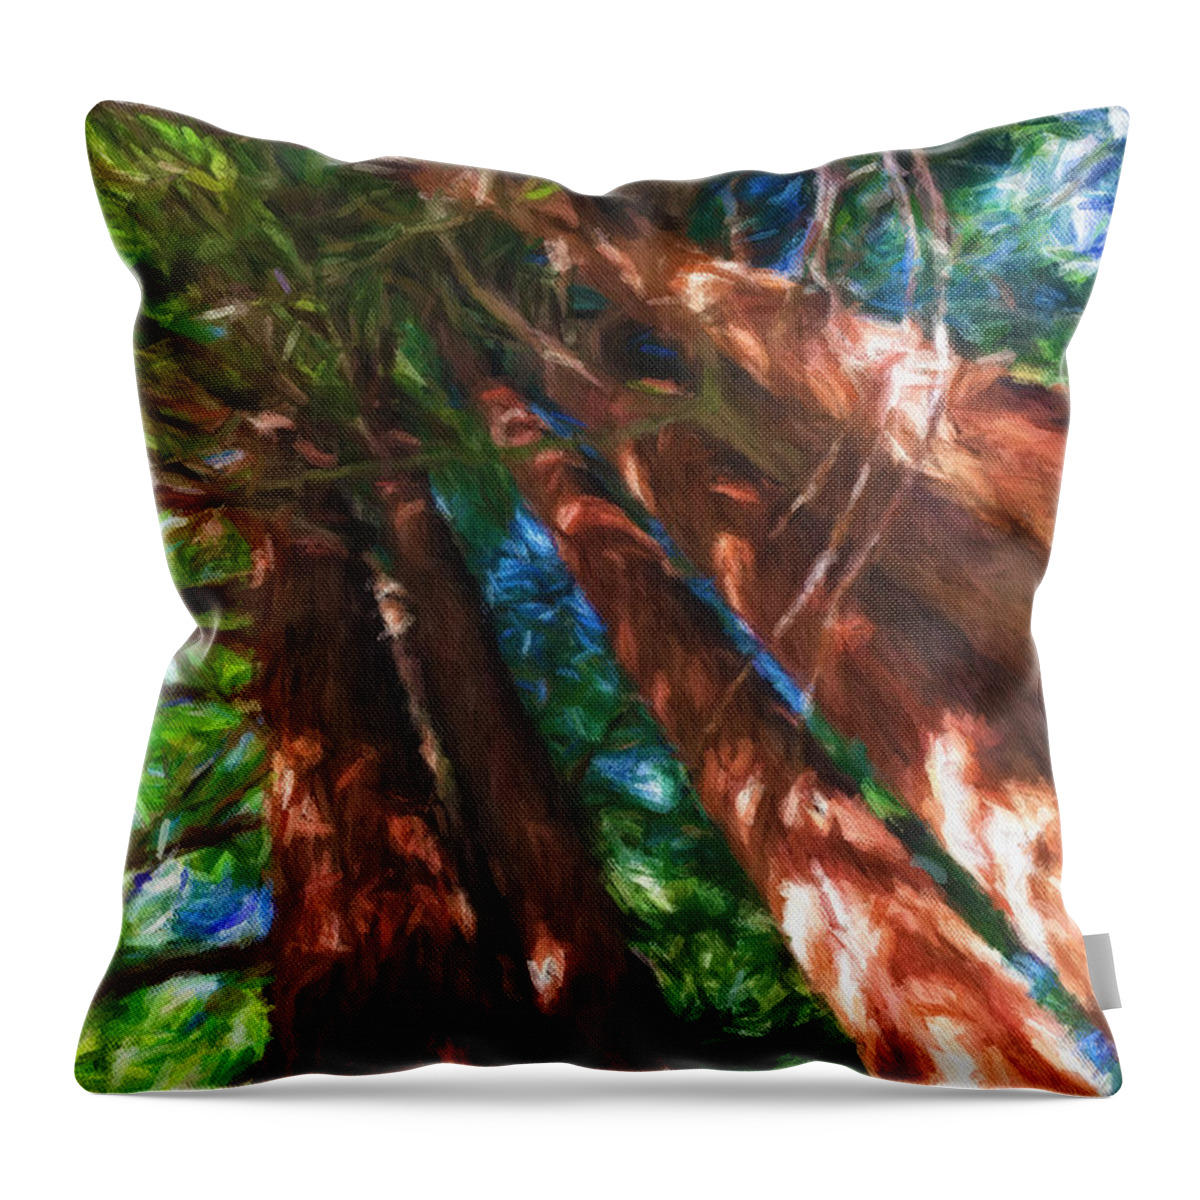 Landscape Throw Pillow featuring the mixed media Redwoods 2 by Jonathan Nguyen